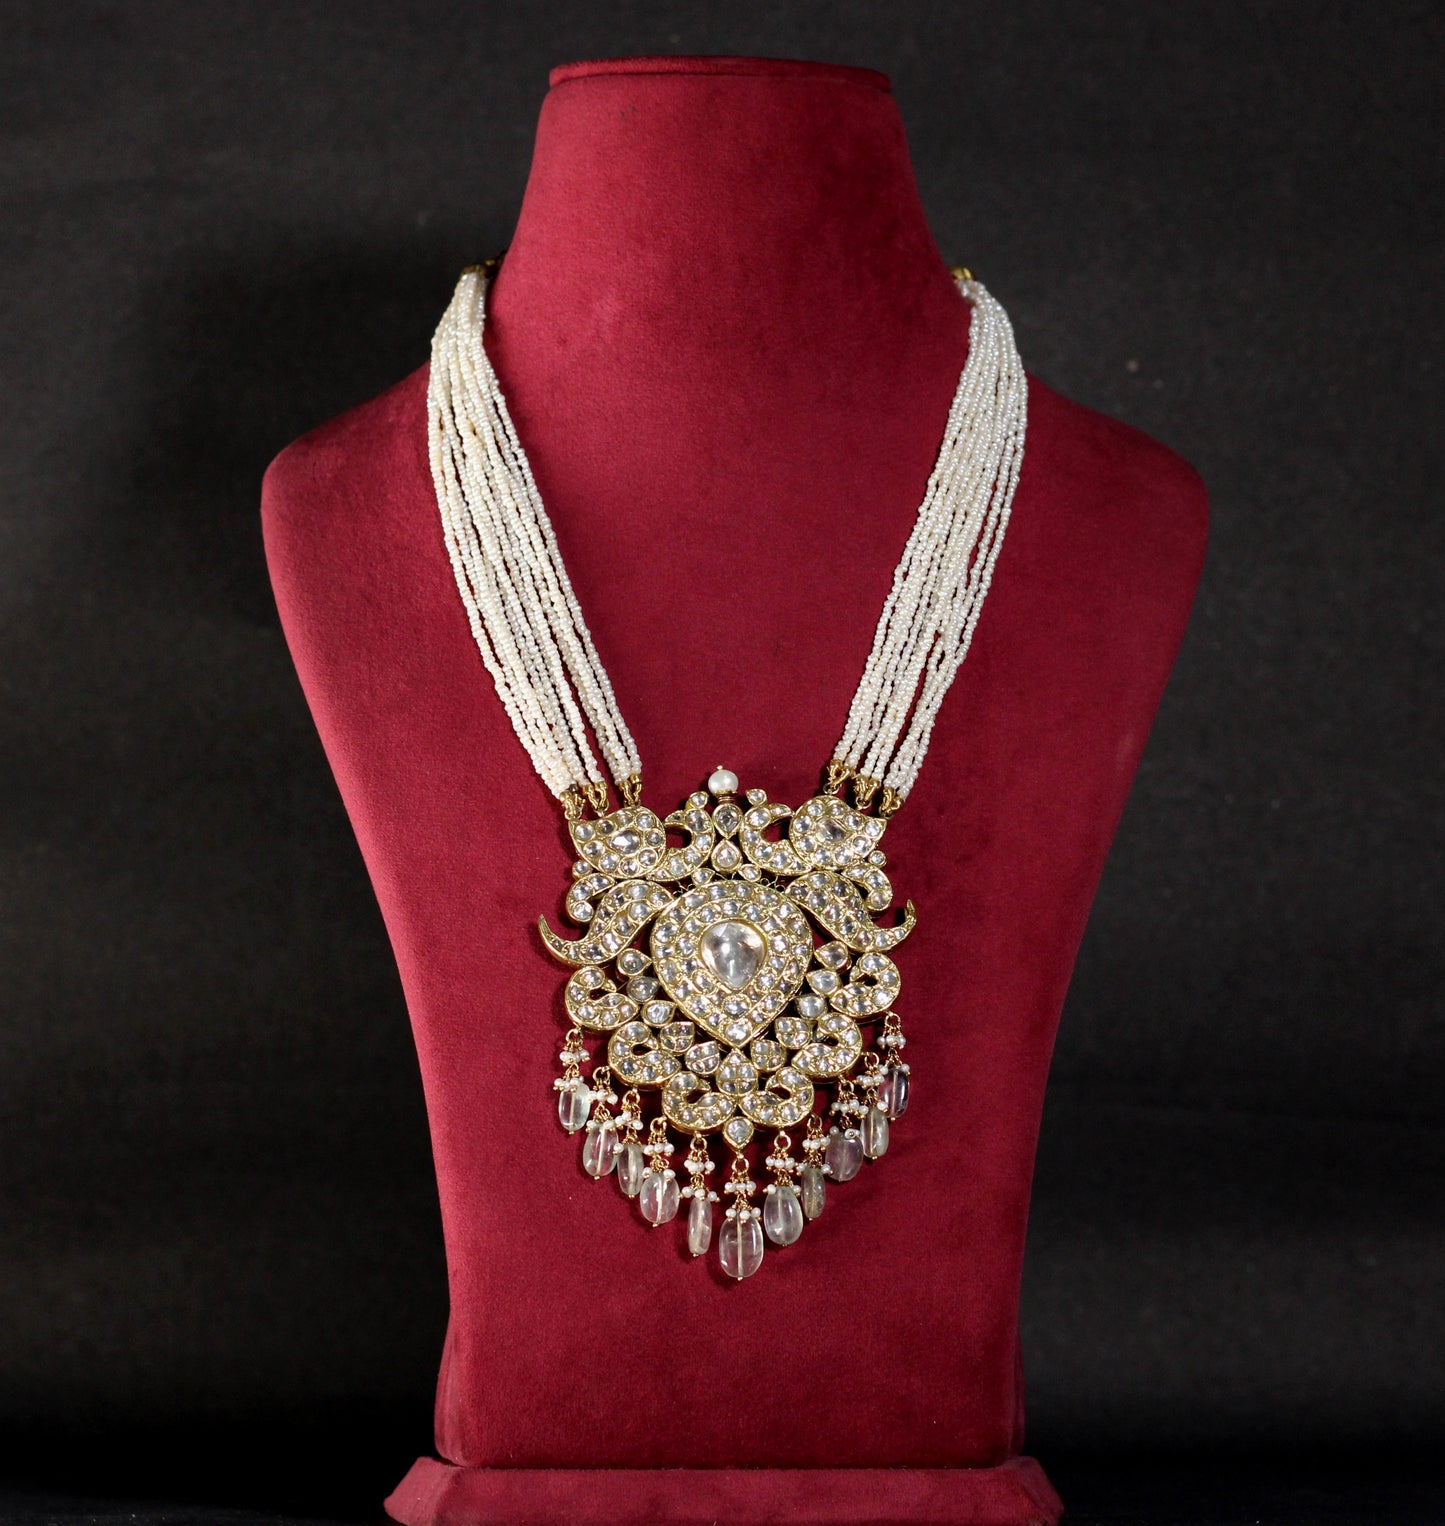 NECKLACE AND EARRING IN  92.5 STERLING WITH 18KT GOLD PLATED KUNDAN AND FLOURIDE AND BEADS STONES